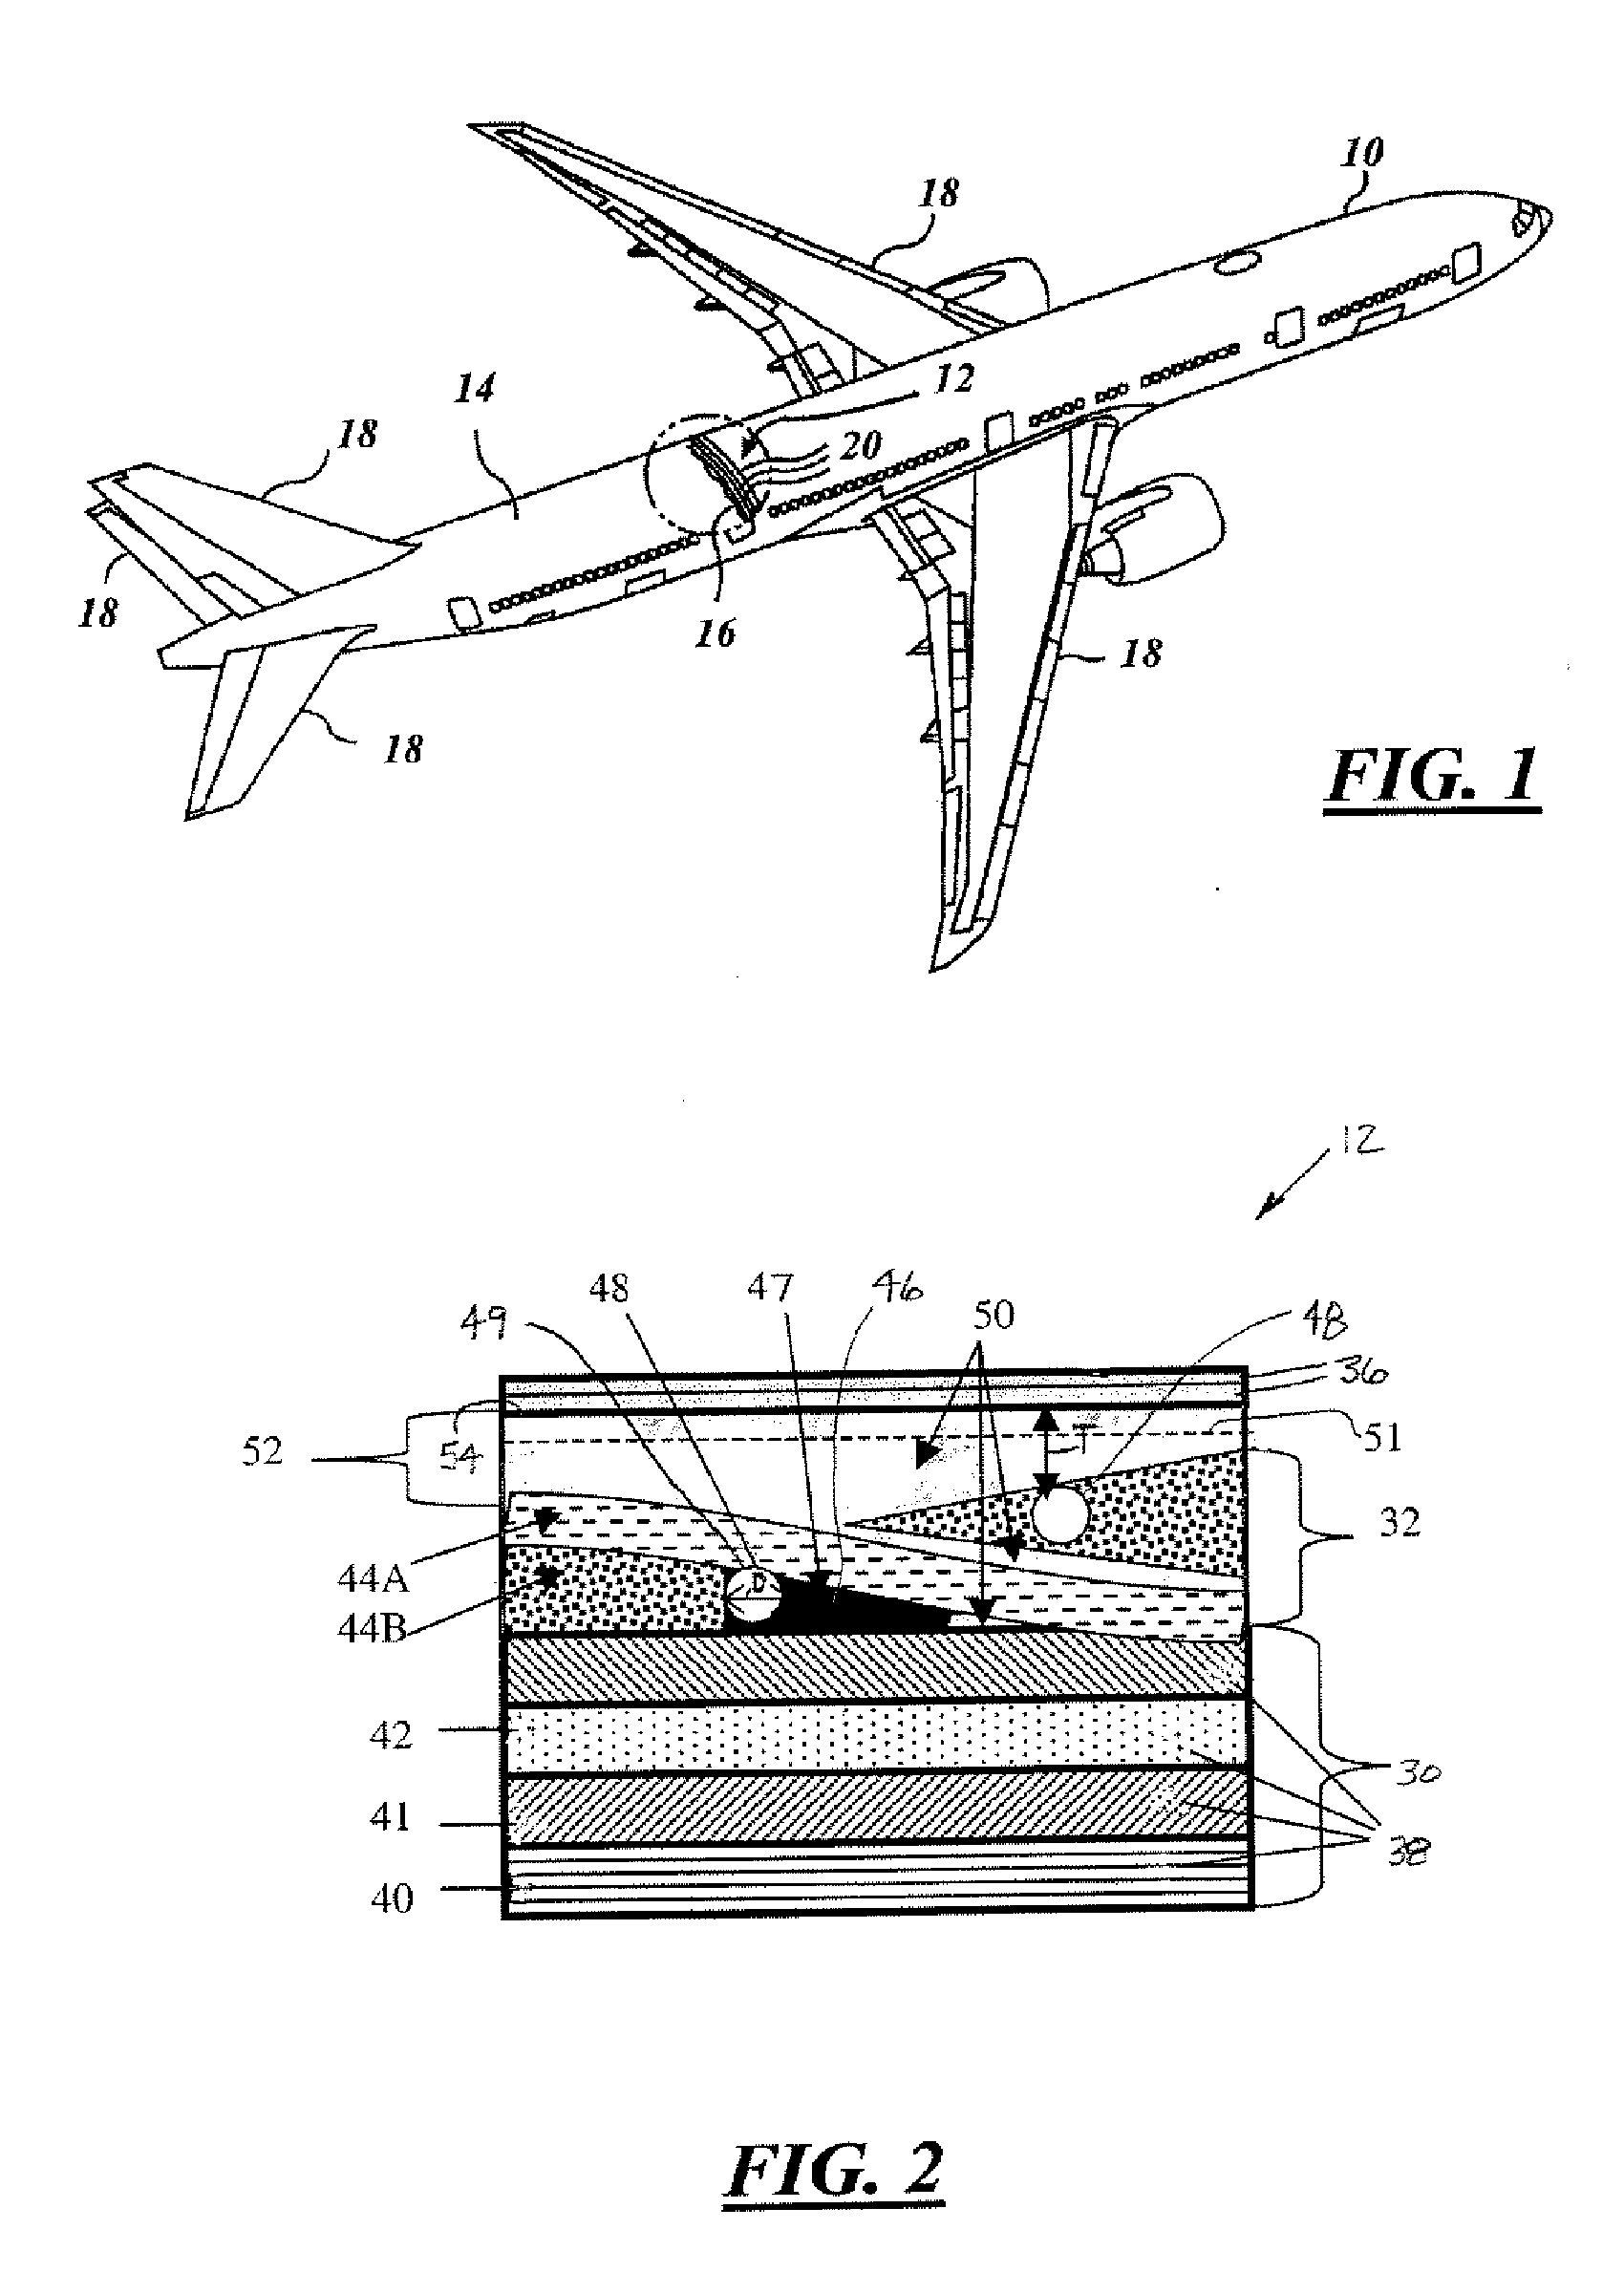 Environmentally stable hybrid fabric system for exterior protection of an aircraft